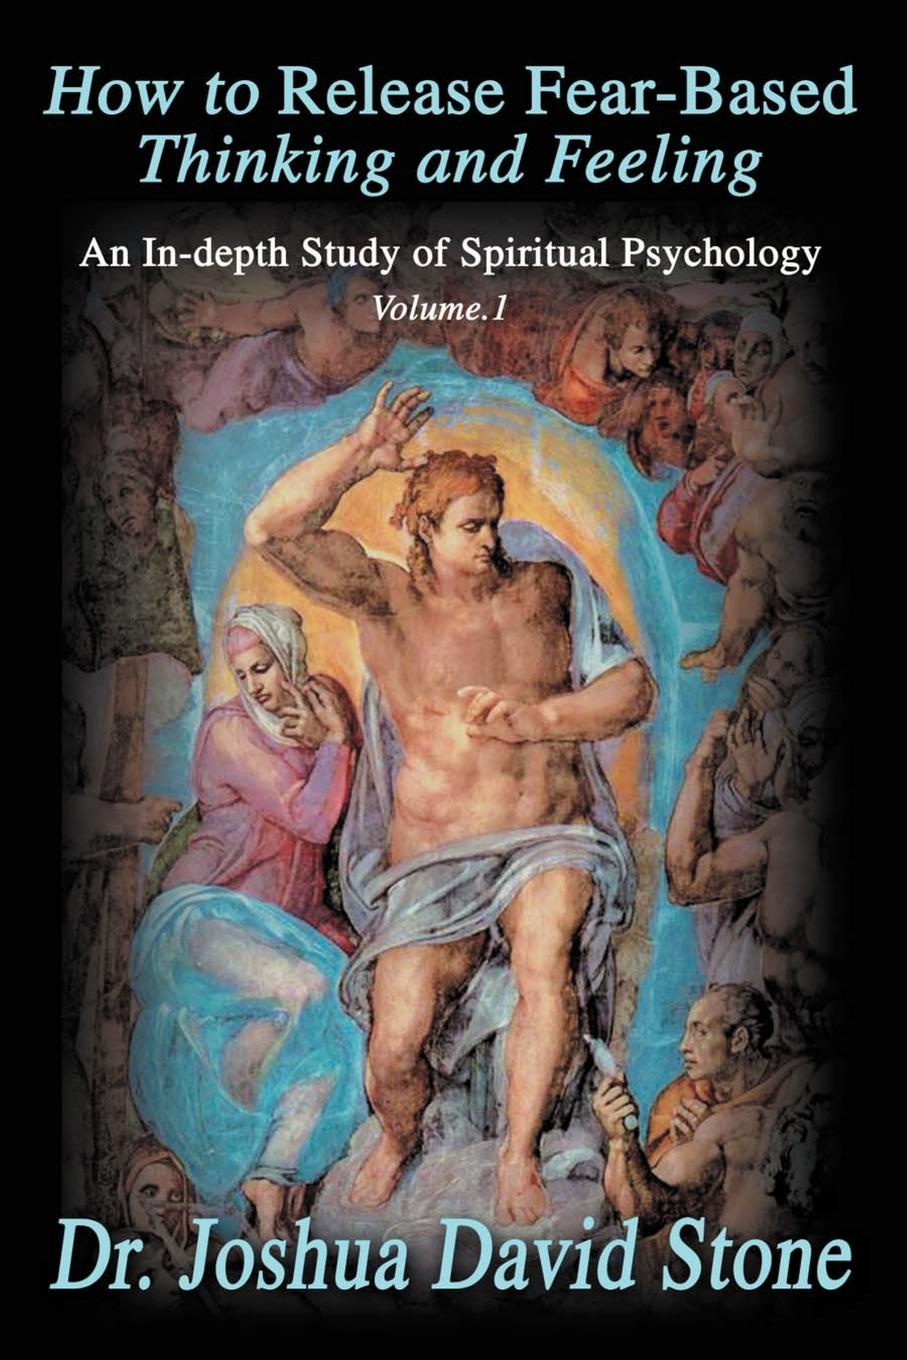 How to Release Fear-Based Thinking and Feeling. An In-Depth Study of Spiritual Psychology Vol. 1